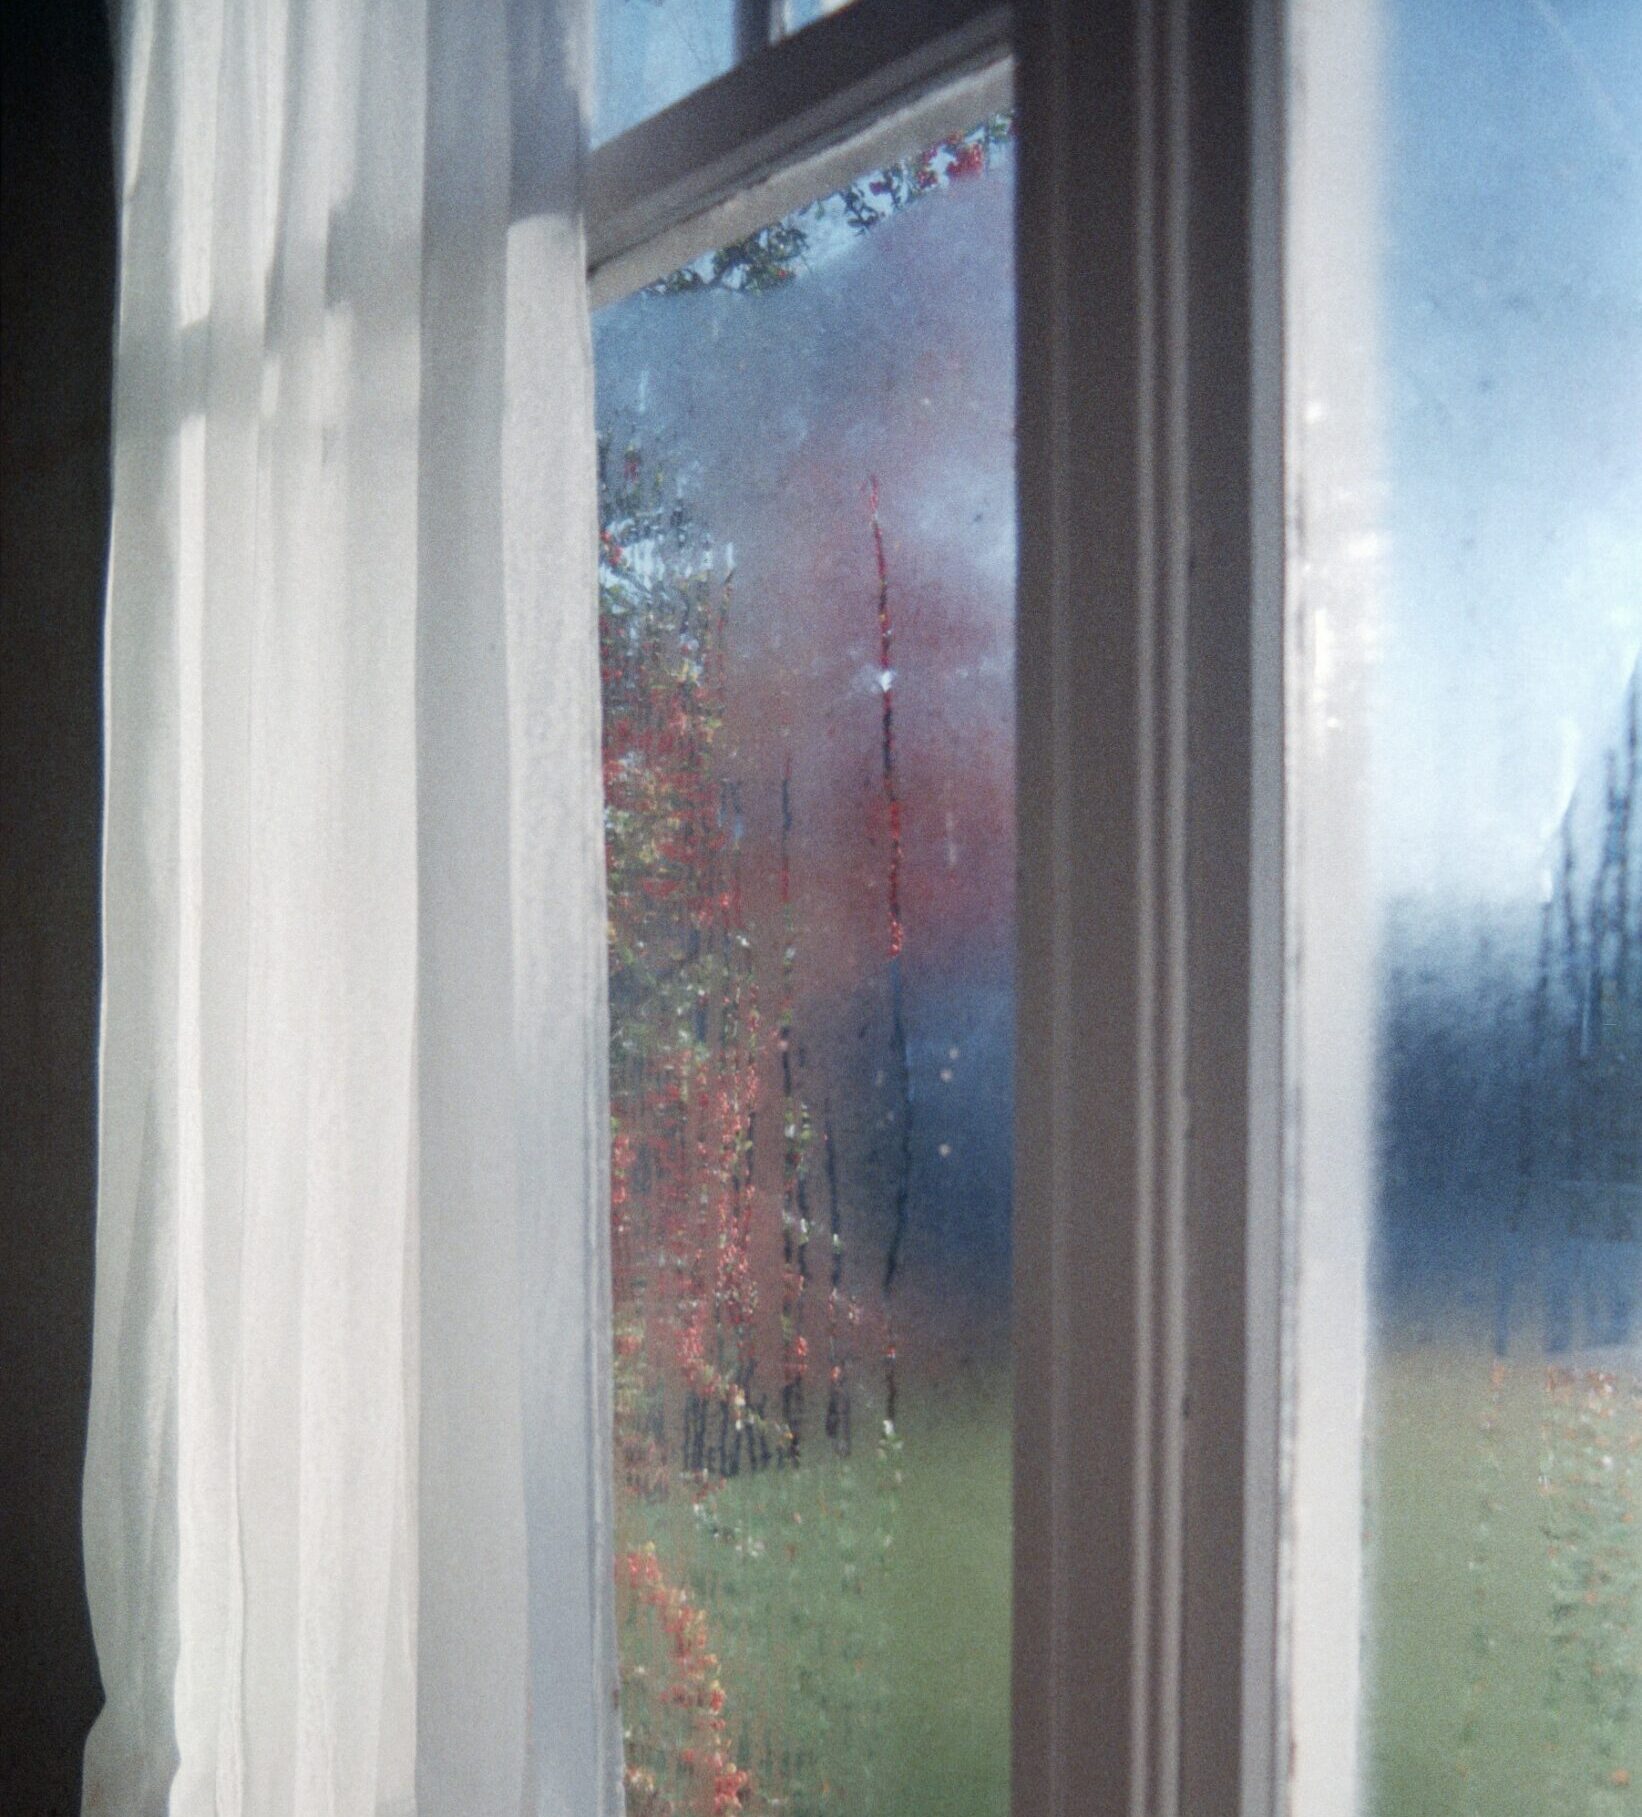 Close view on window with condensation and fog between the glass panes.